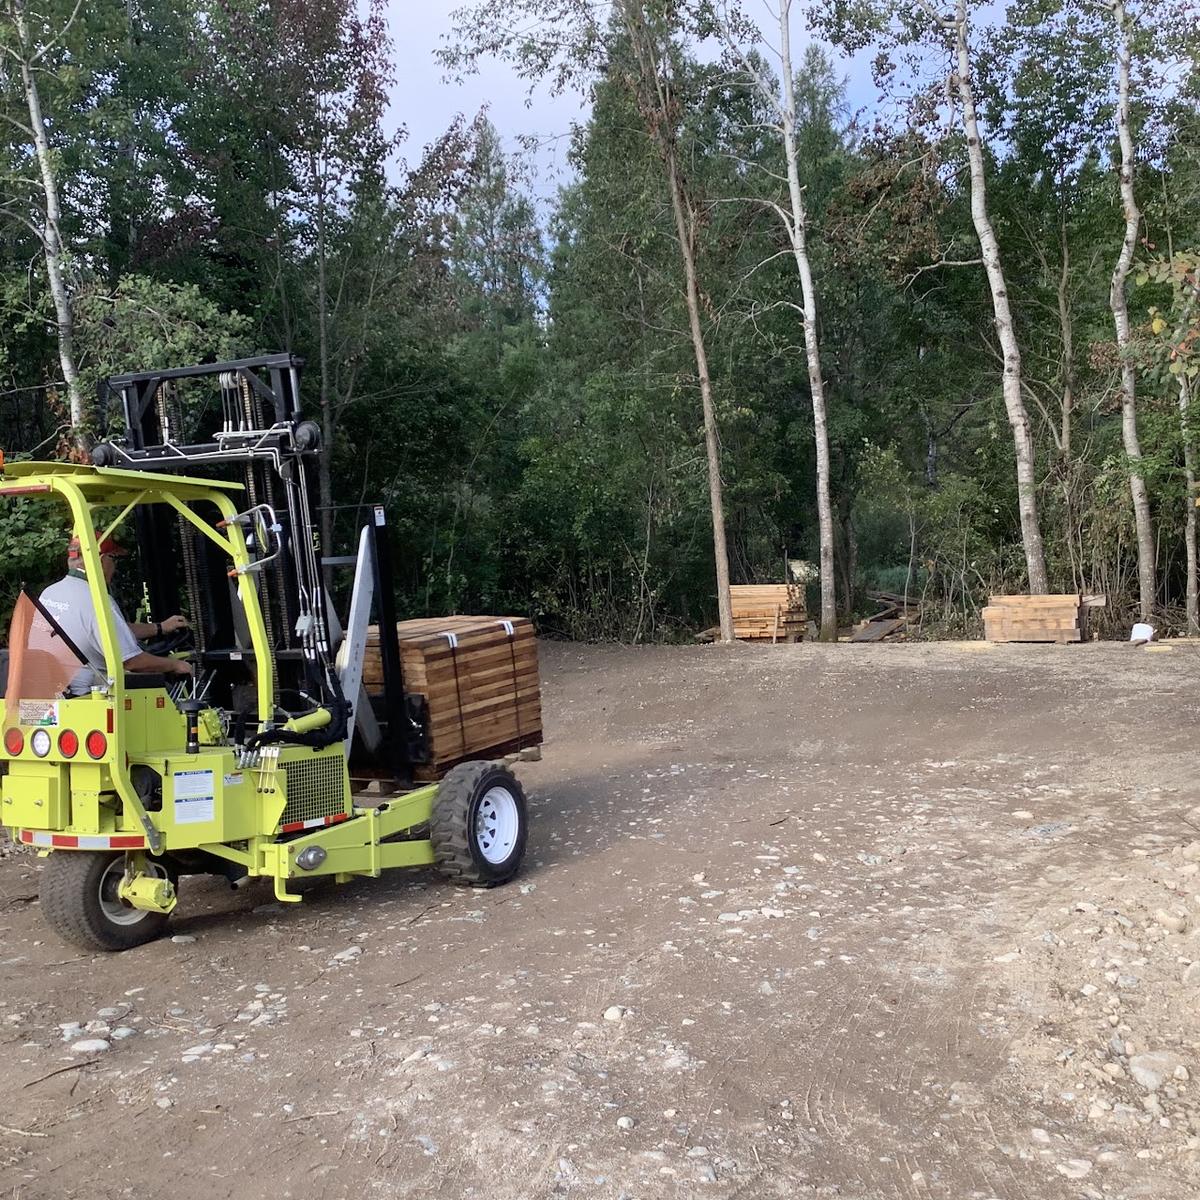 Small fork lift moving piles of lumber